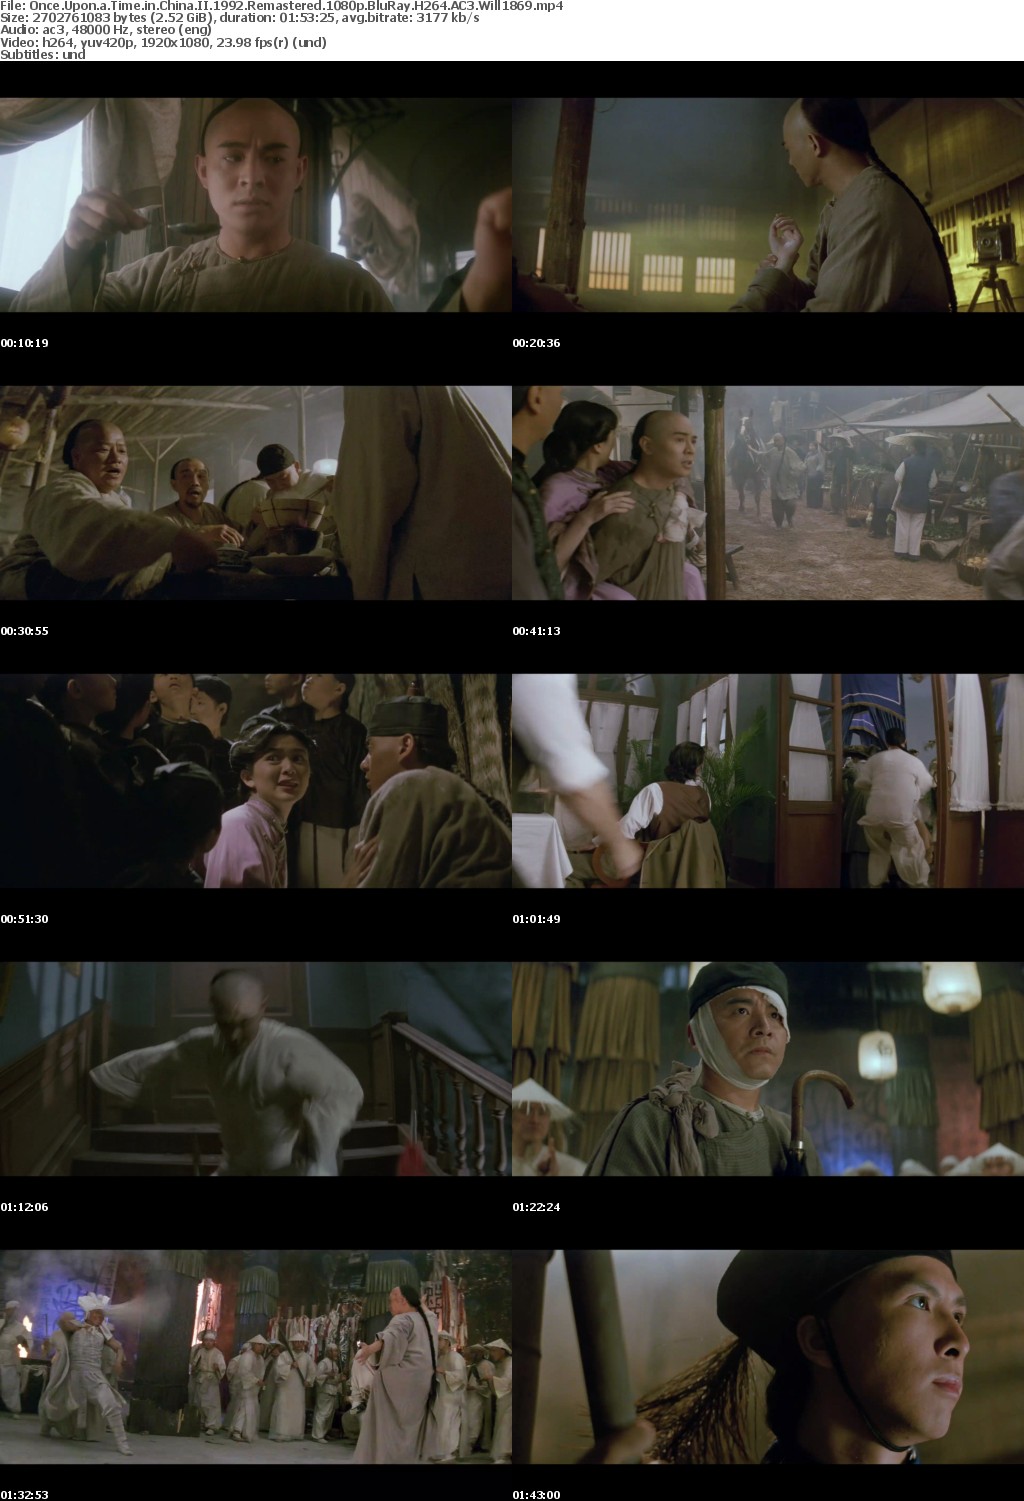 Once Upon a Time in China II 1992 Remastered 1080p BluRay H264 AC3 Will1869